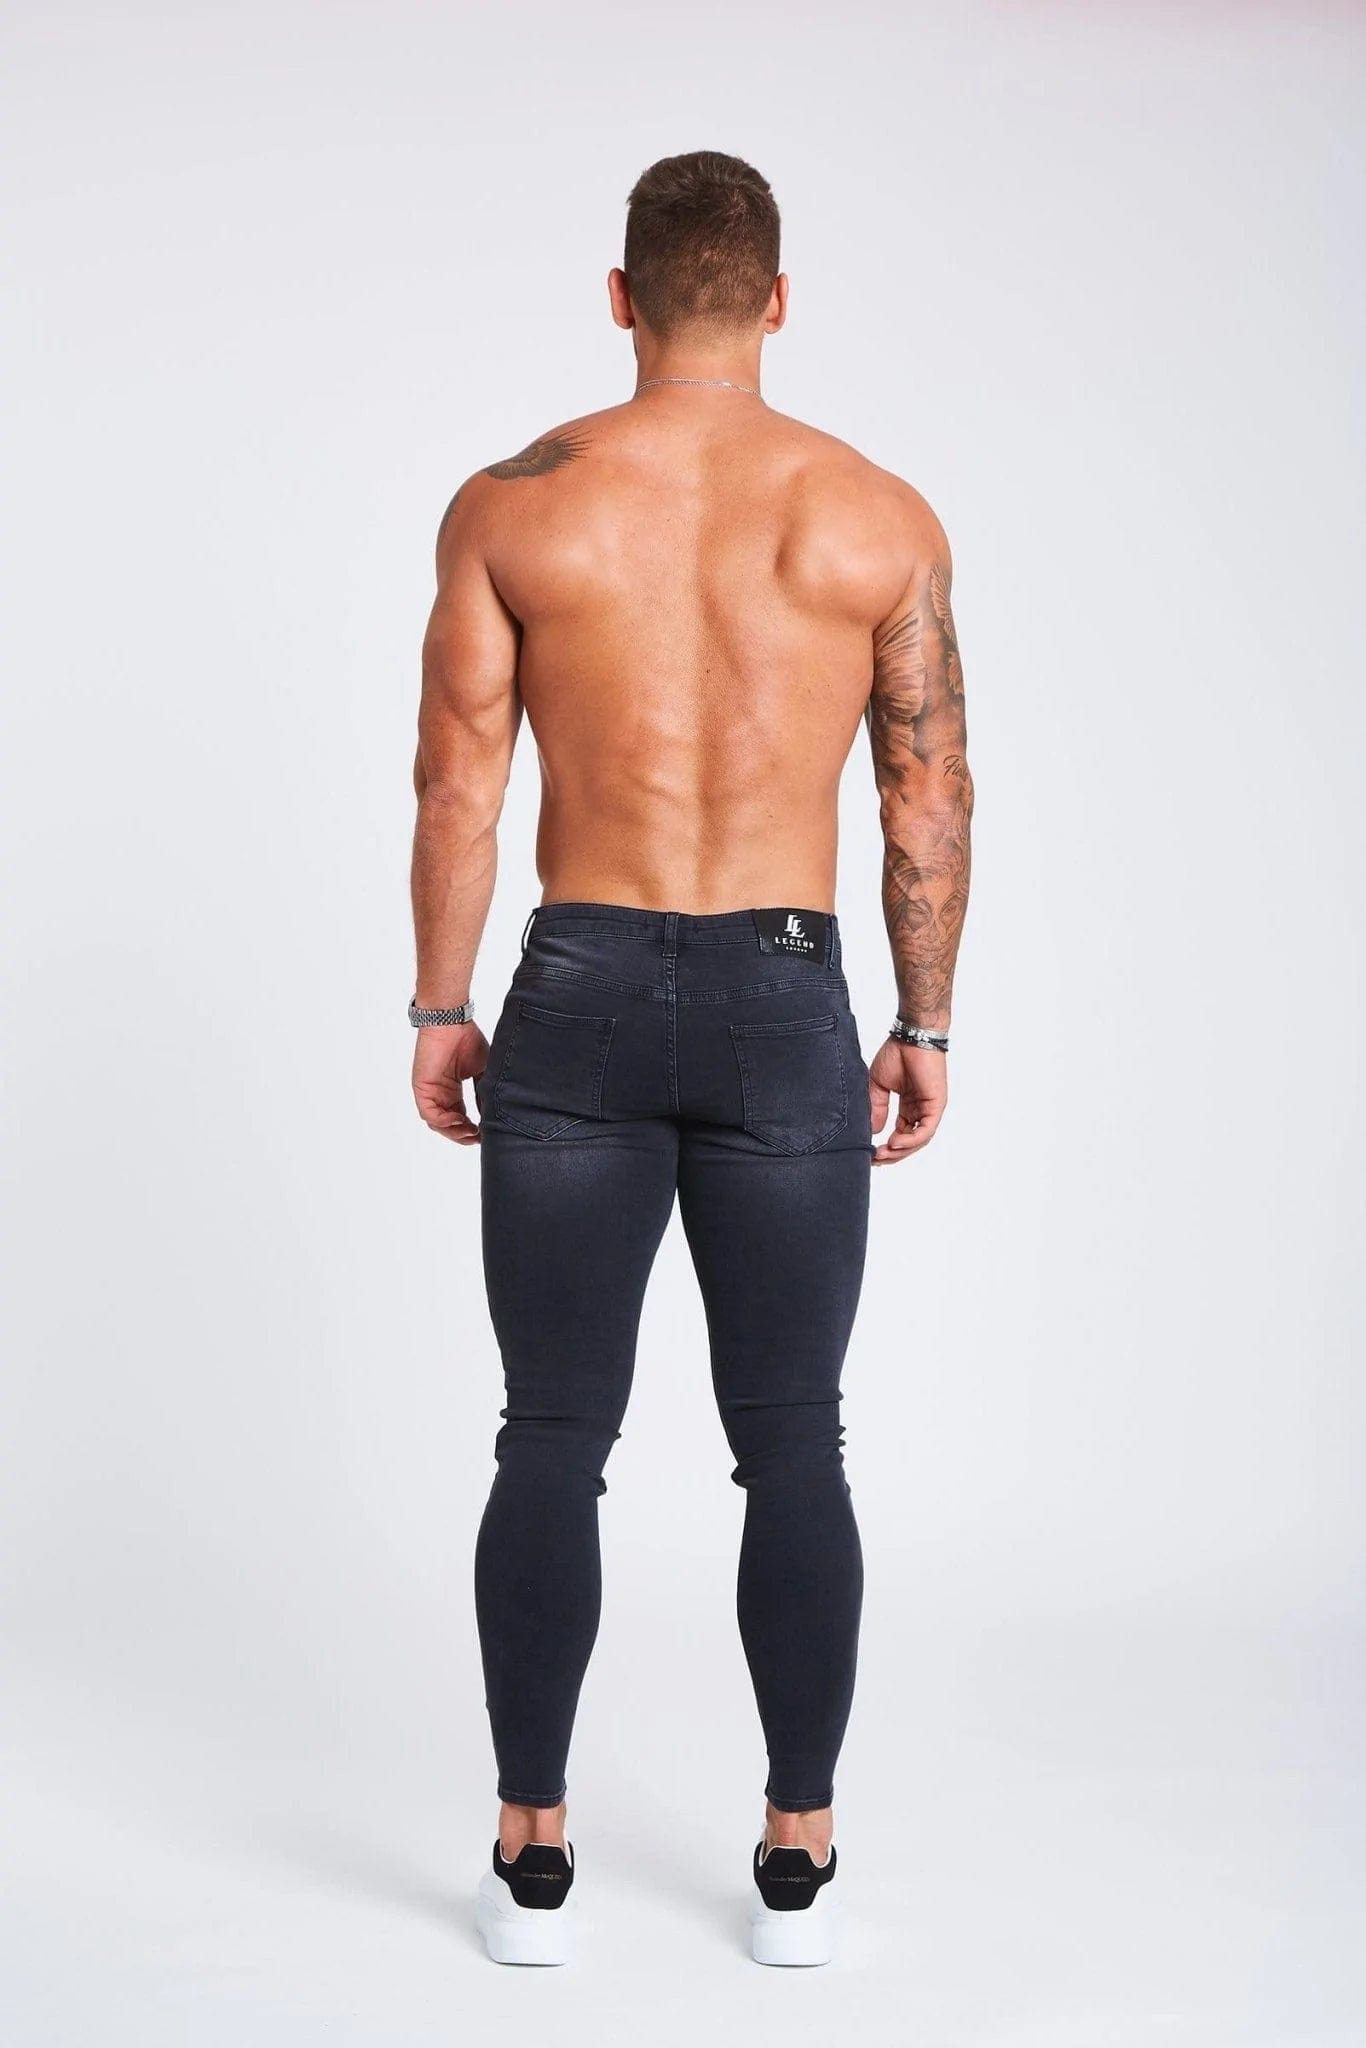 Legend London Jeans Grey Jeans - Non-Ripped